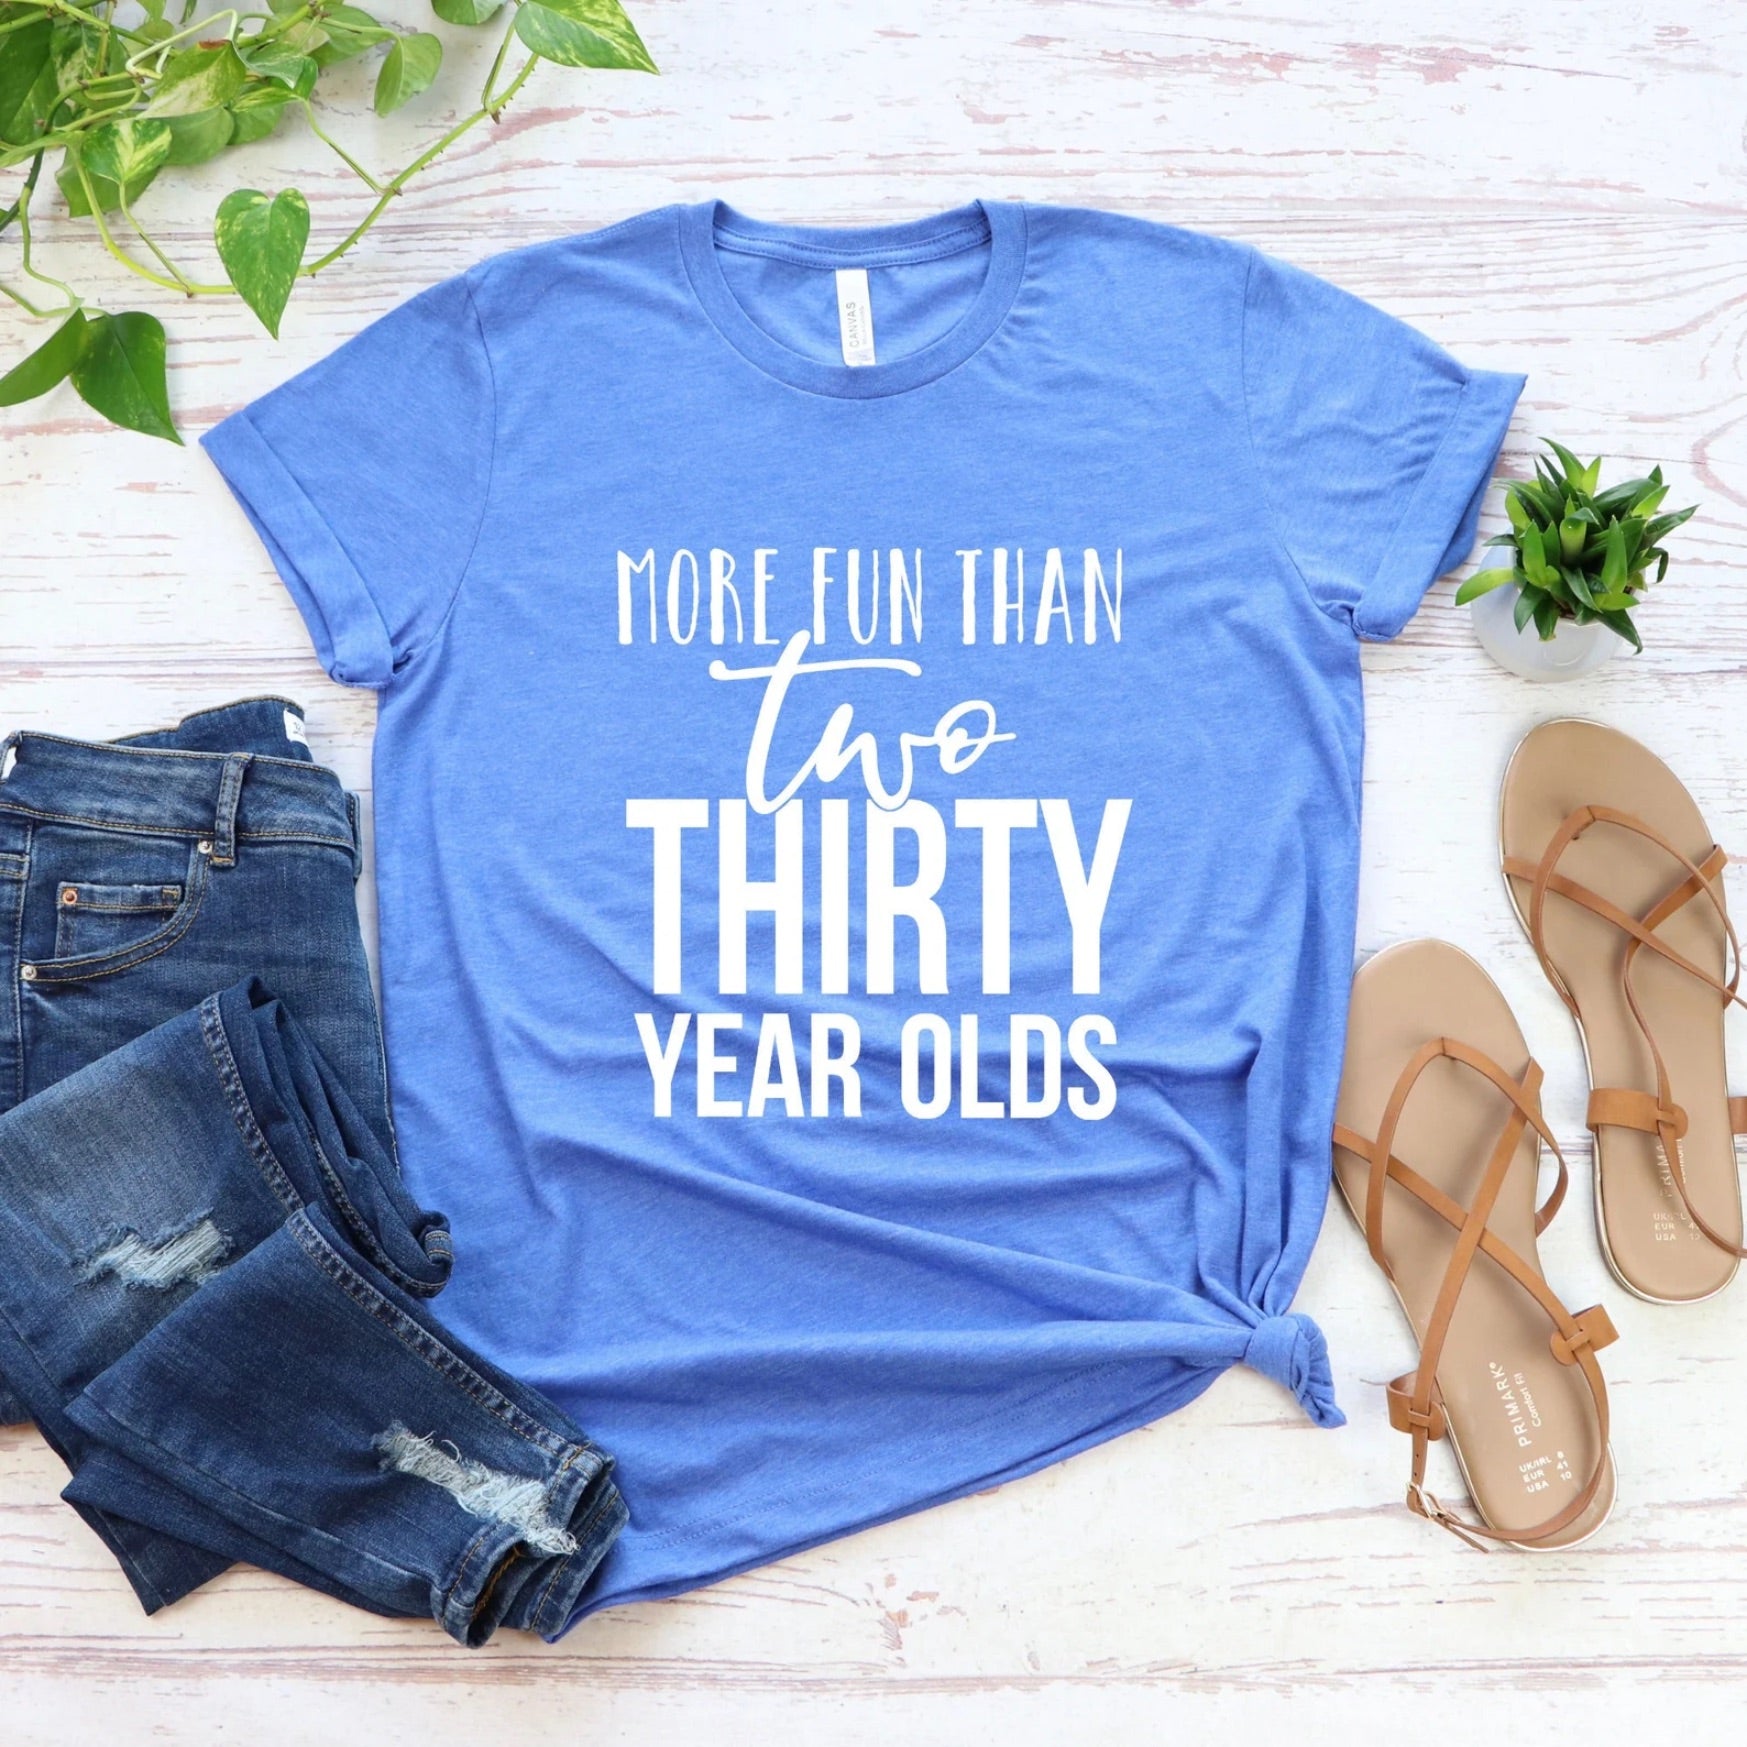 MORE FUN THAN TWO Thirty YEARs OLD Birthday T-shirt